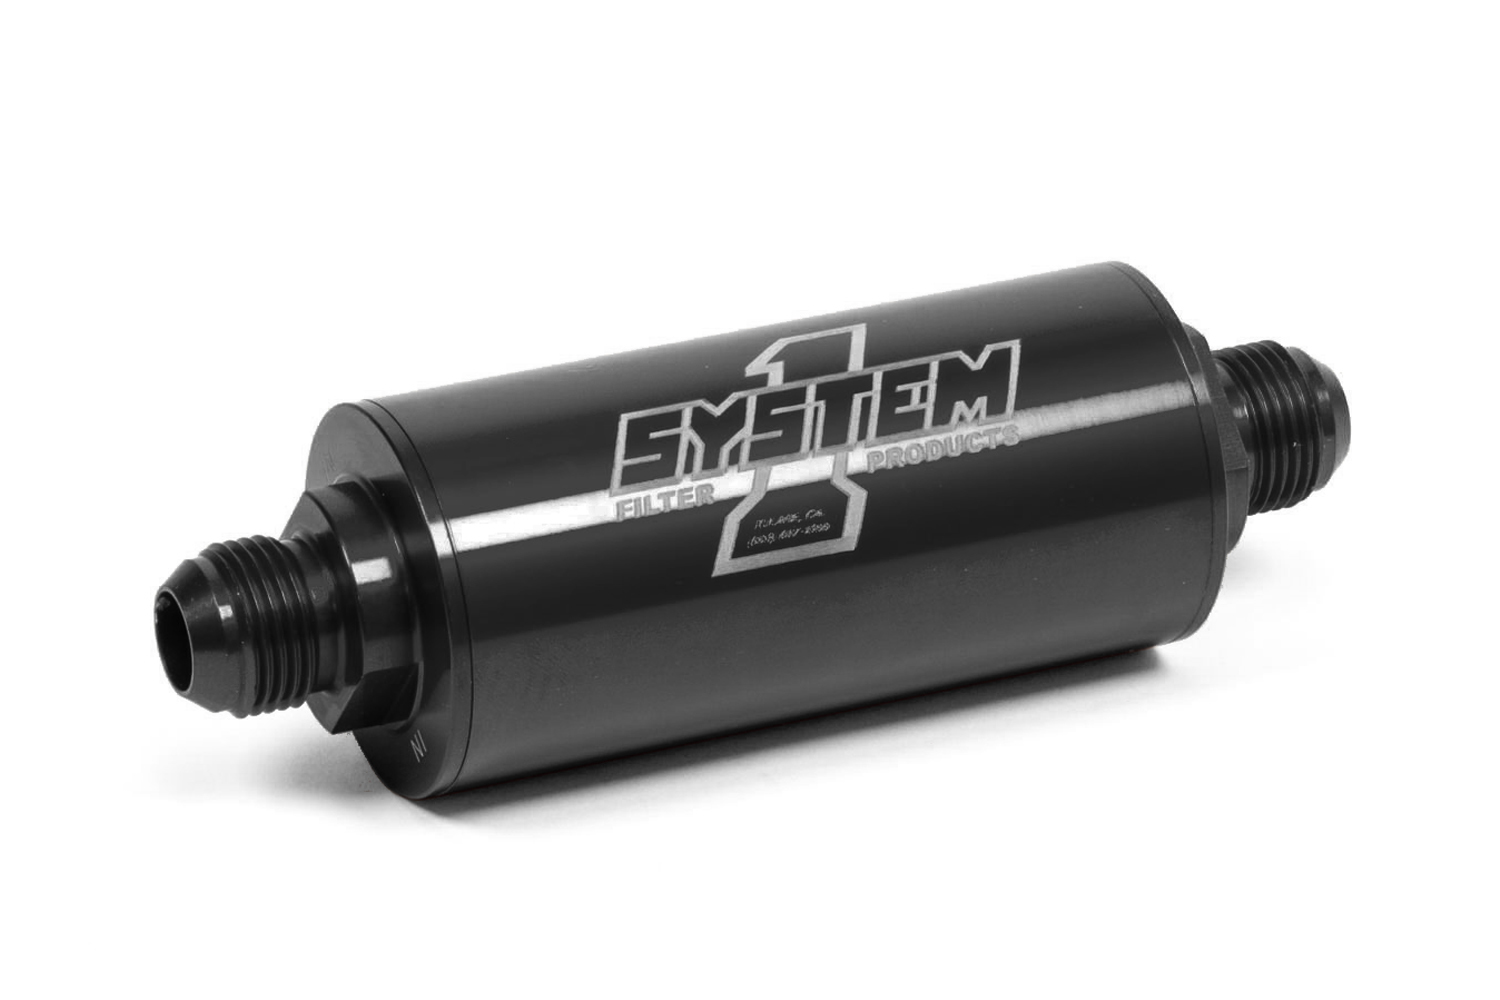 System One 201-203410B Fuel Filter, Medium Billet, In-Line, 35 Micron, Stainless Element, 10 AN Male Inlet, 10 AN Male Outlet, Aluminum, Black Anodized, Each